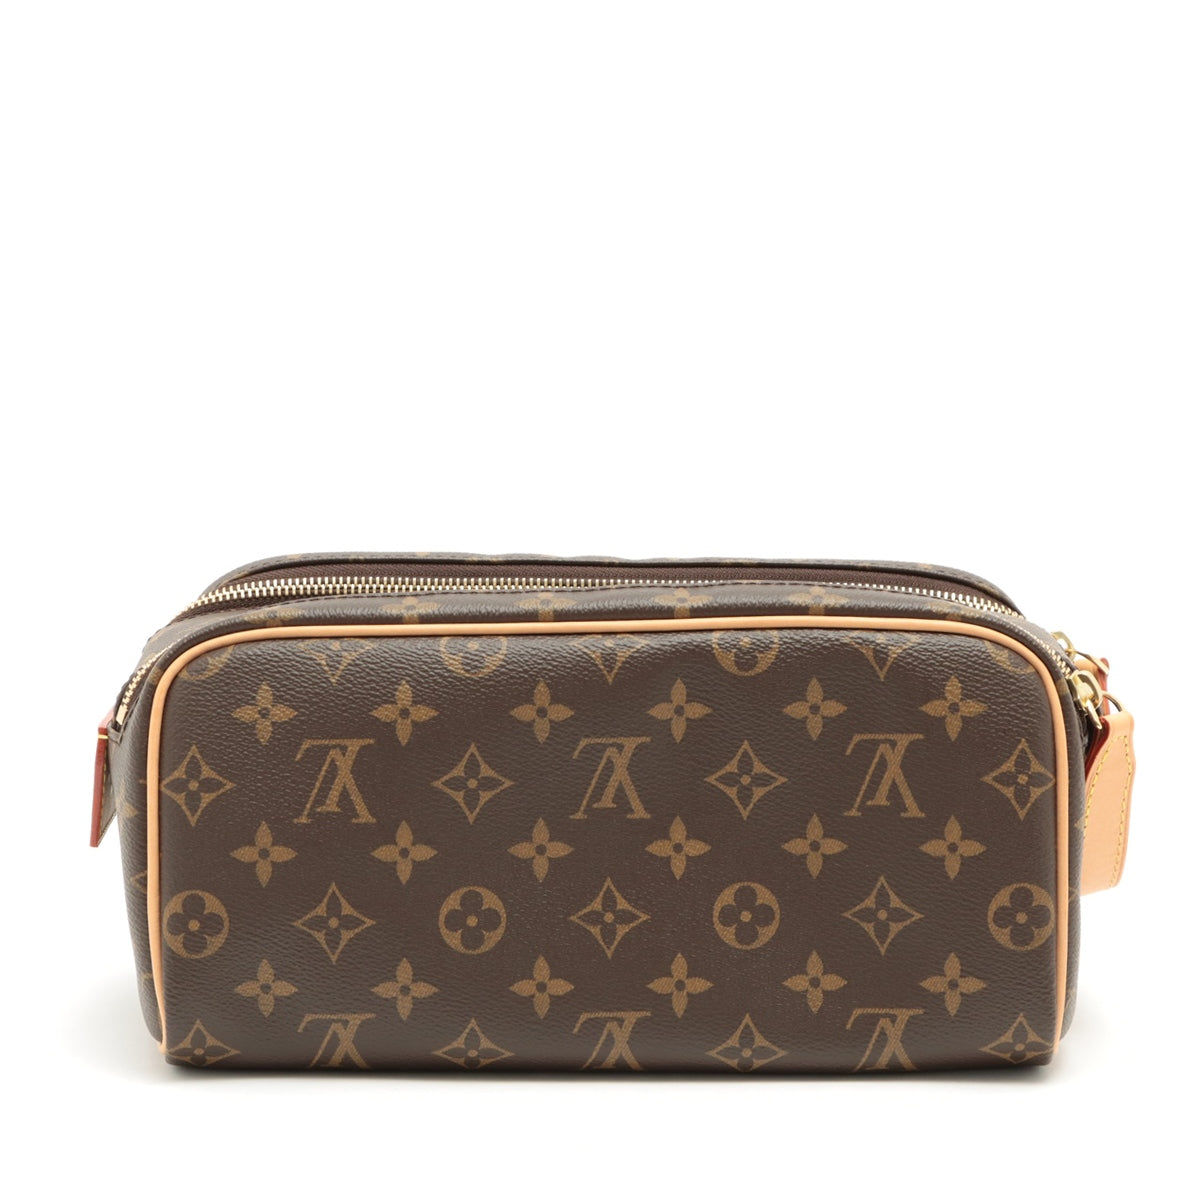 Louis Vuitton Monogram Dopp kit M44494 The back of the flap is peeled off